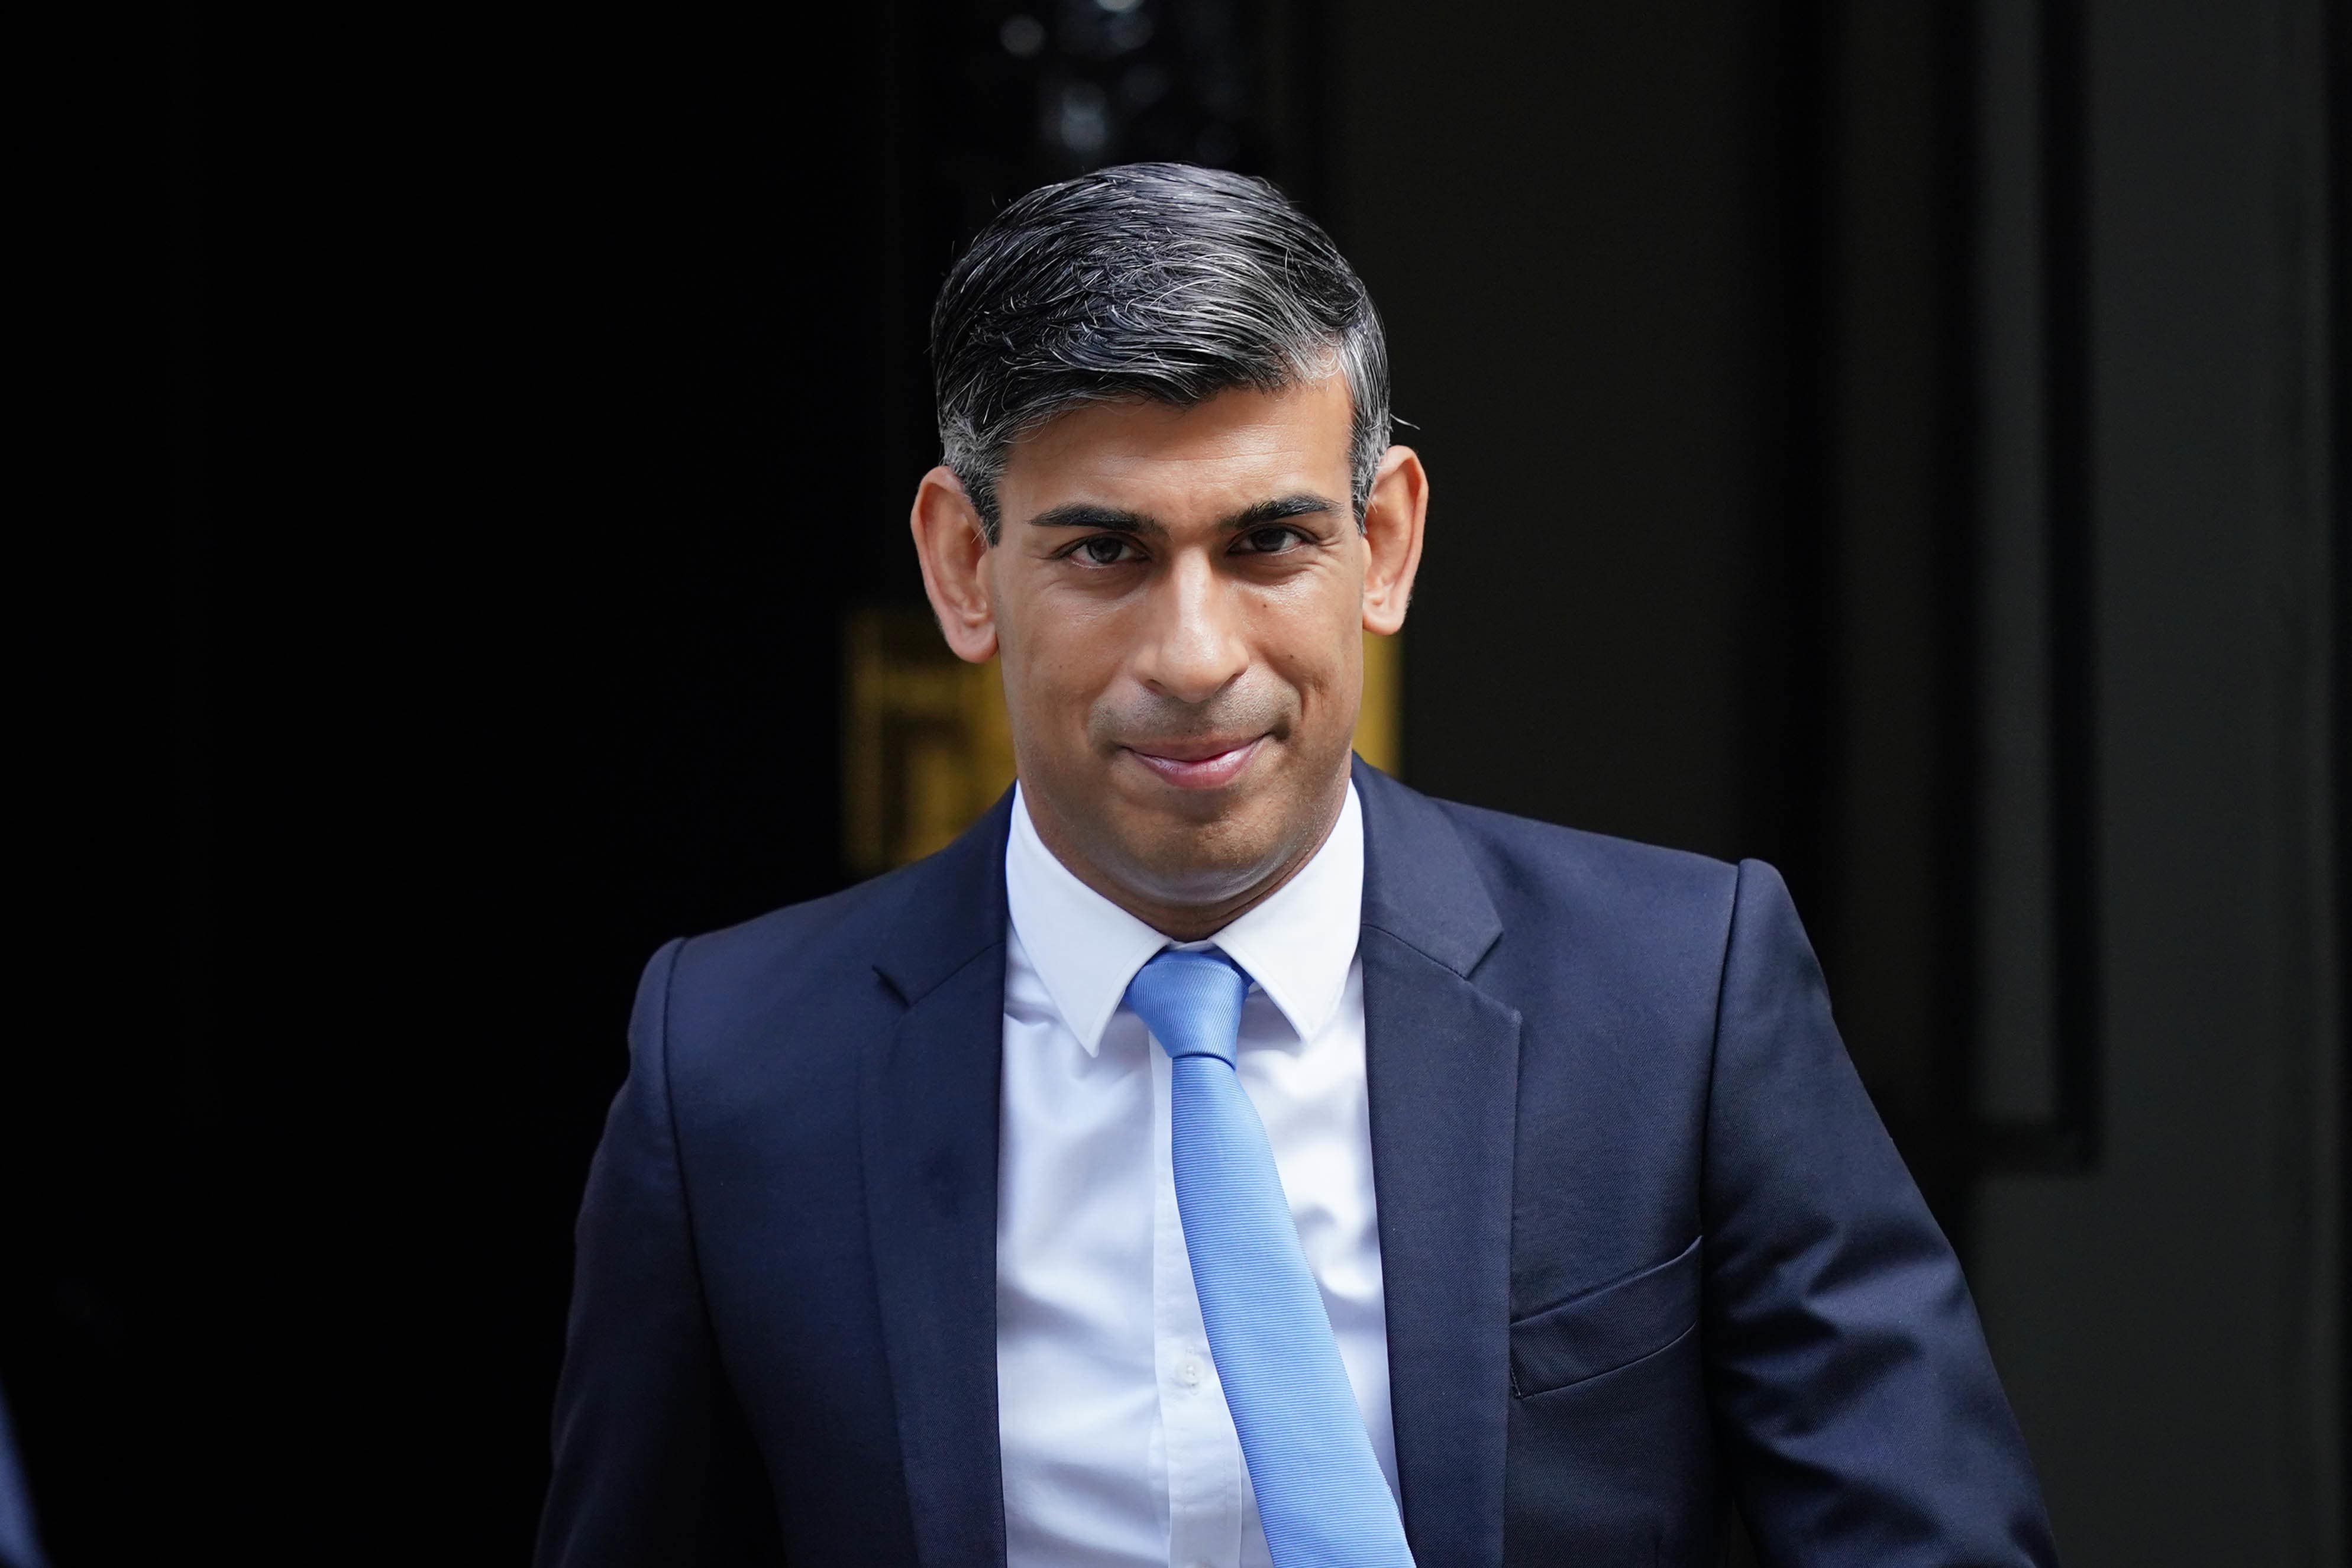 Rishi Sunak has said No10 is ‘fired up’ to win the next election